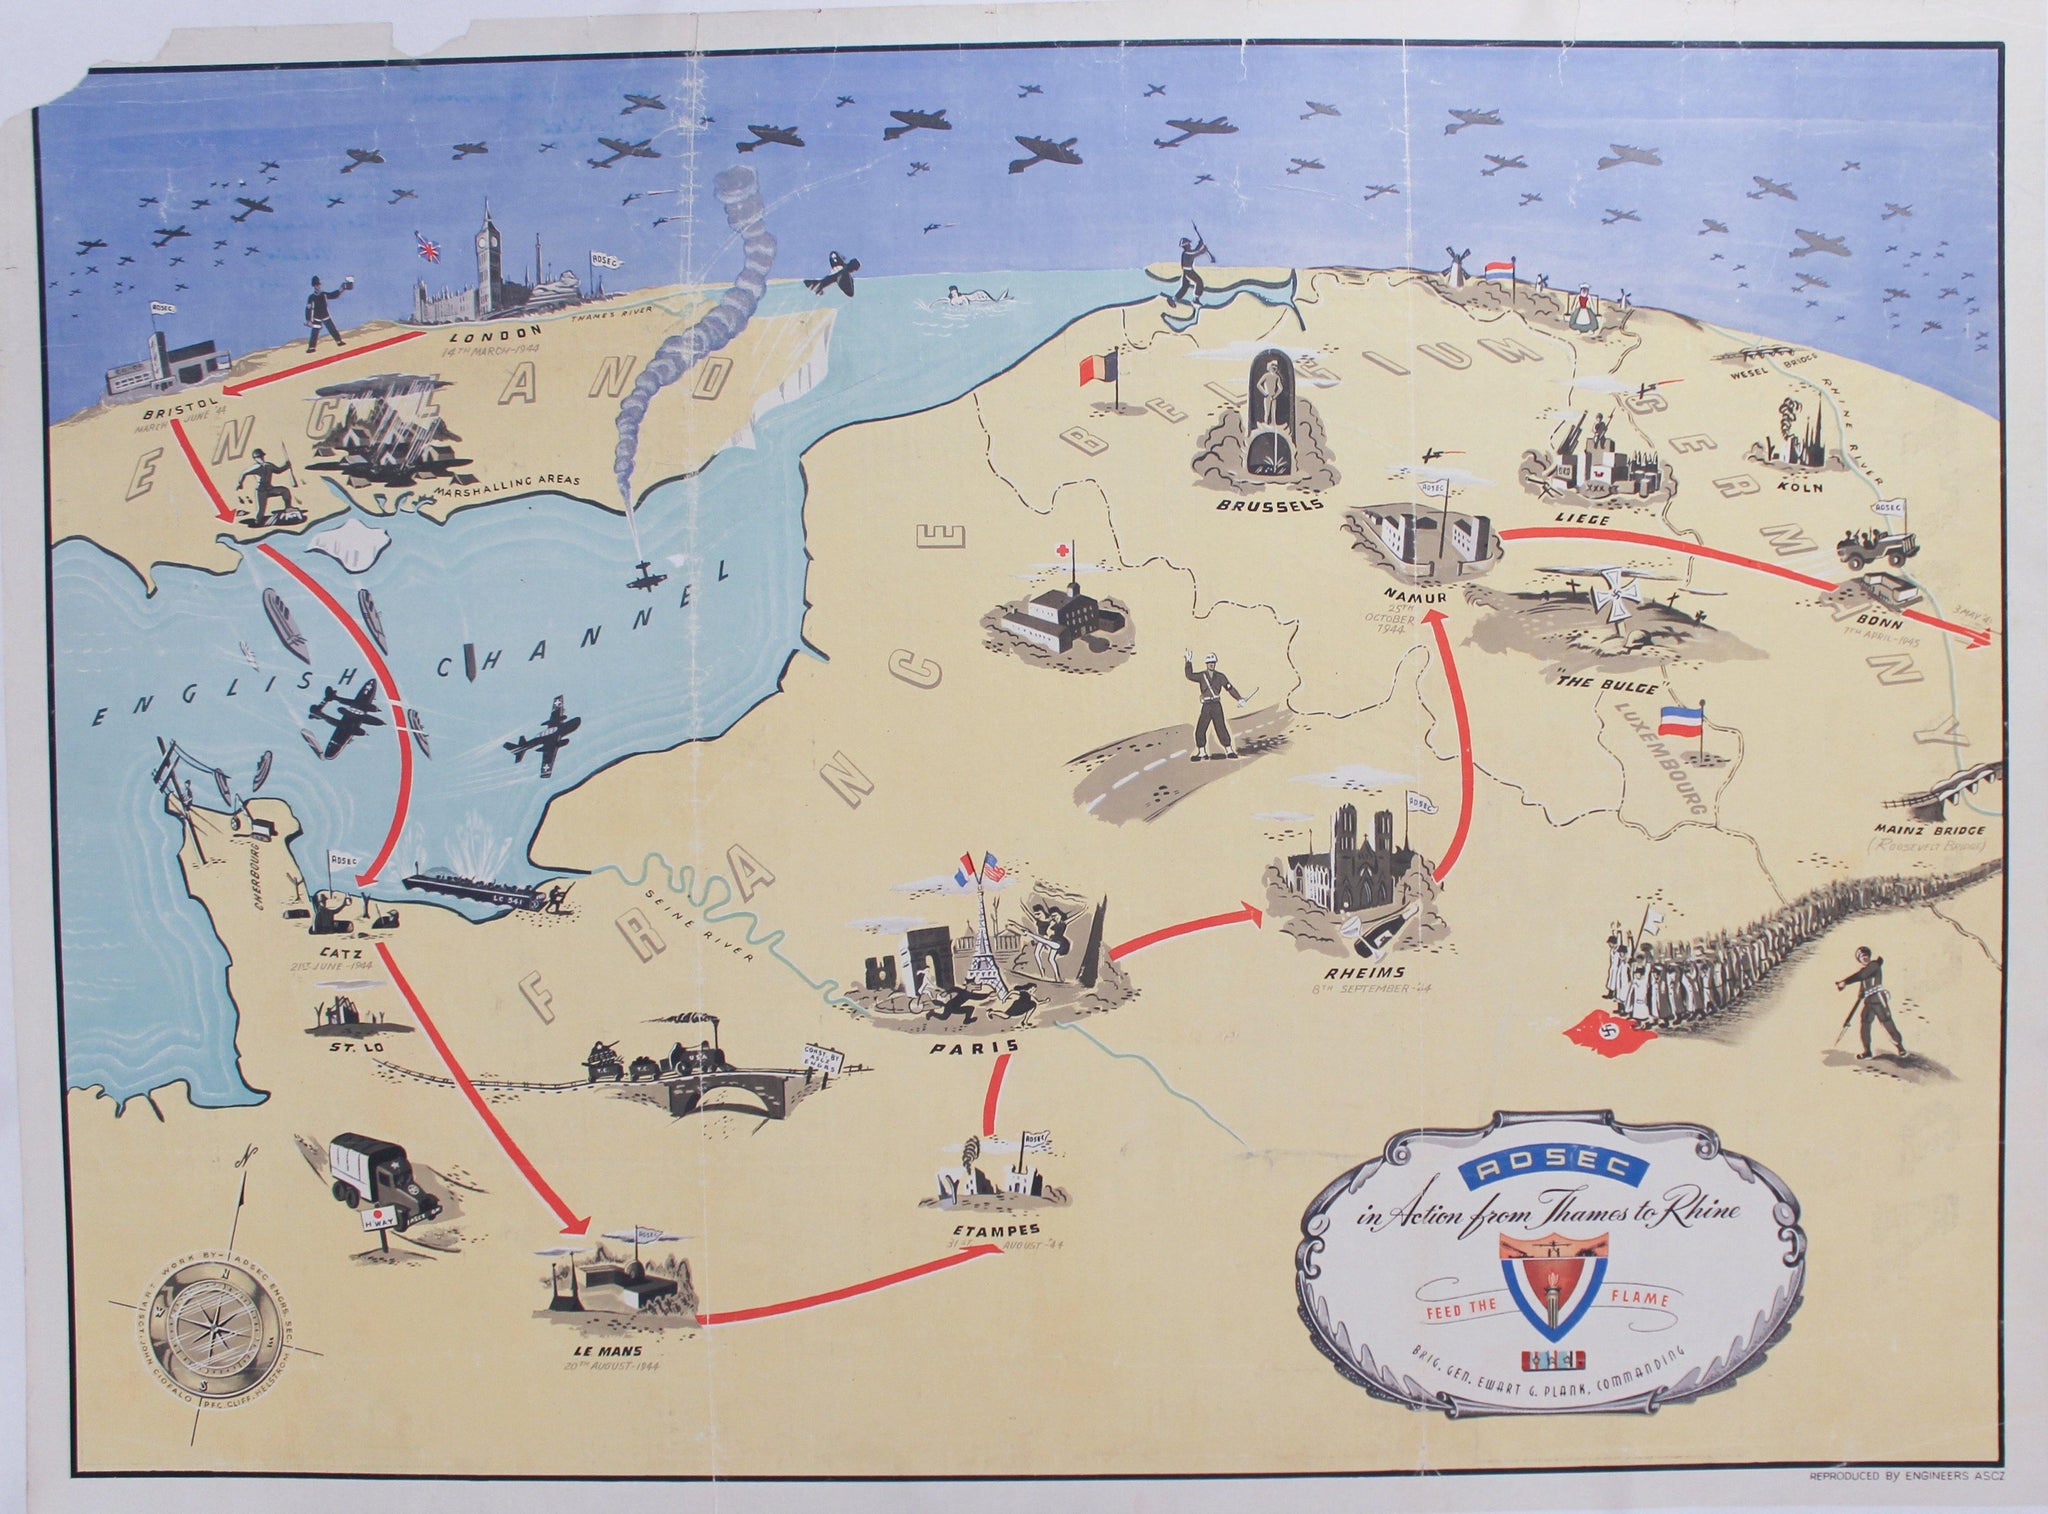 c. 1942 Pictoral/Illustrated Map - ADSEC In Action From Thames to Rhine Feed the Flame - Golden Age Posters